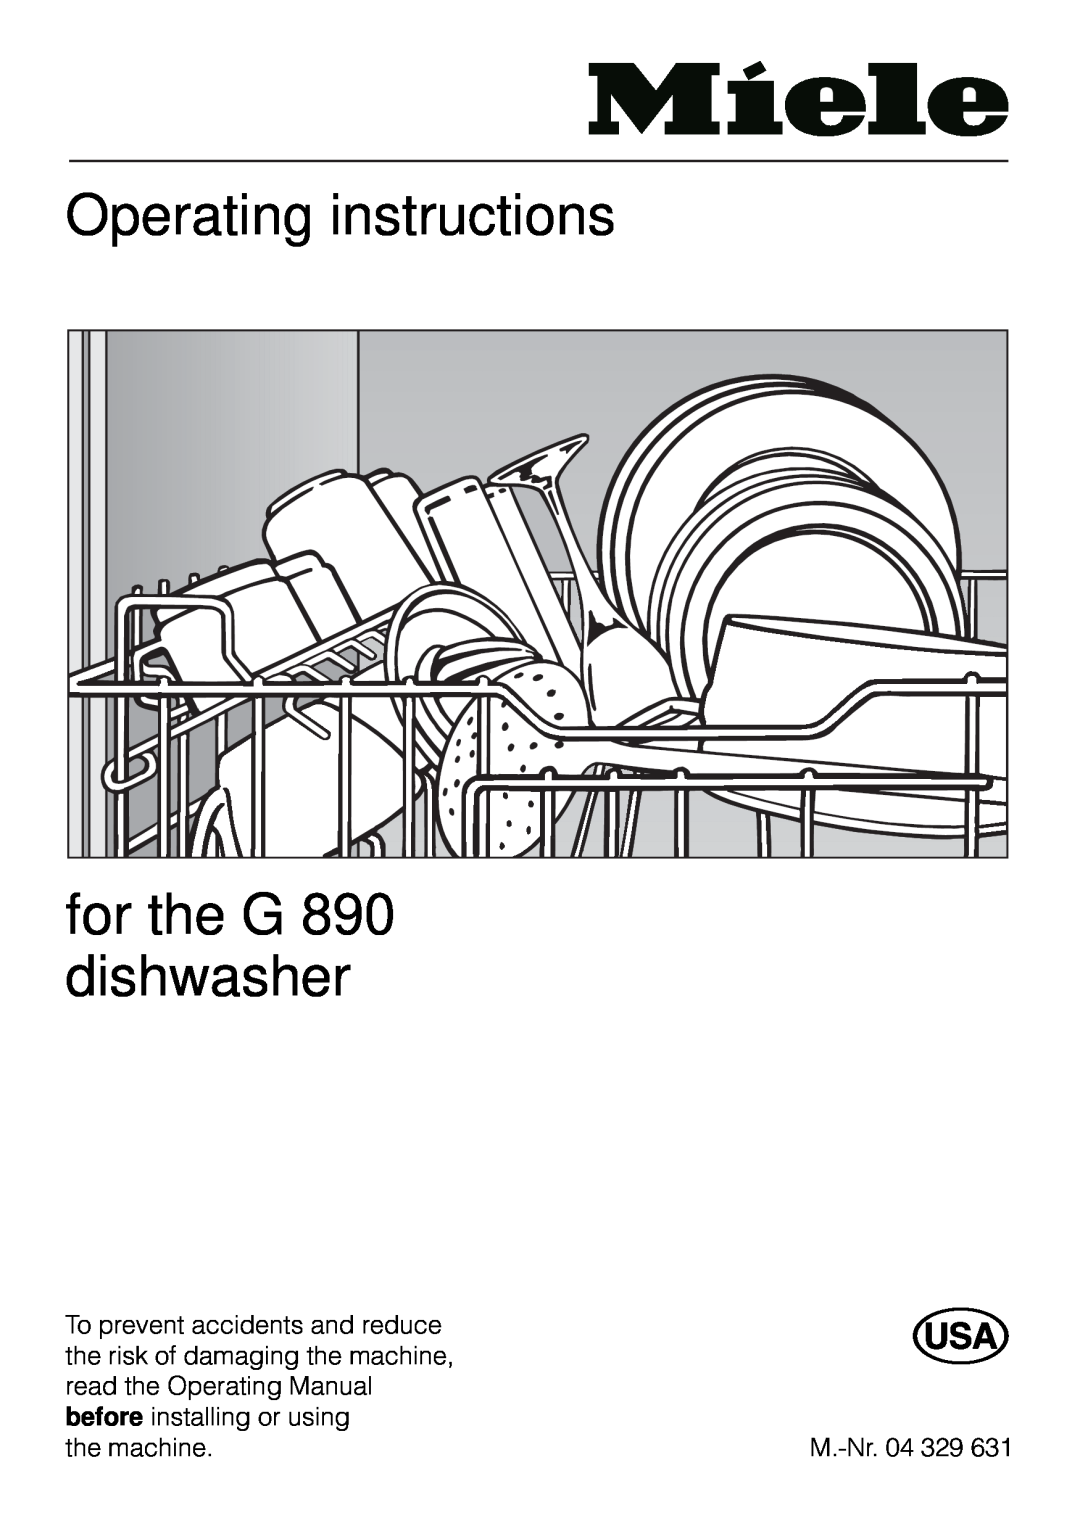 Miele manual Operating instructions for the G 890 dishwasher 